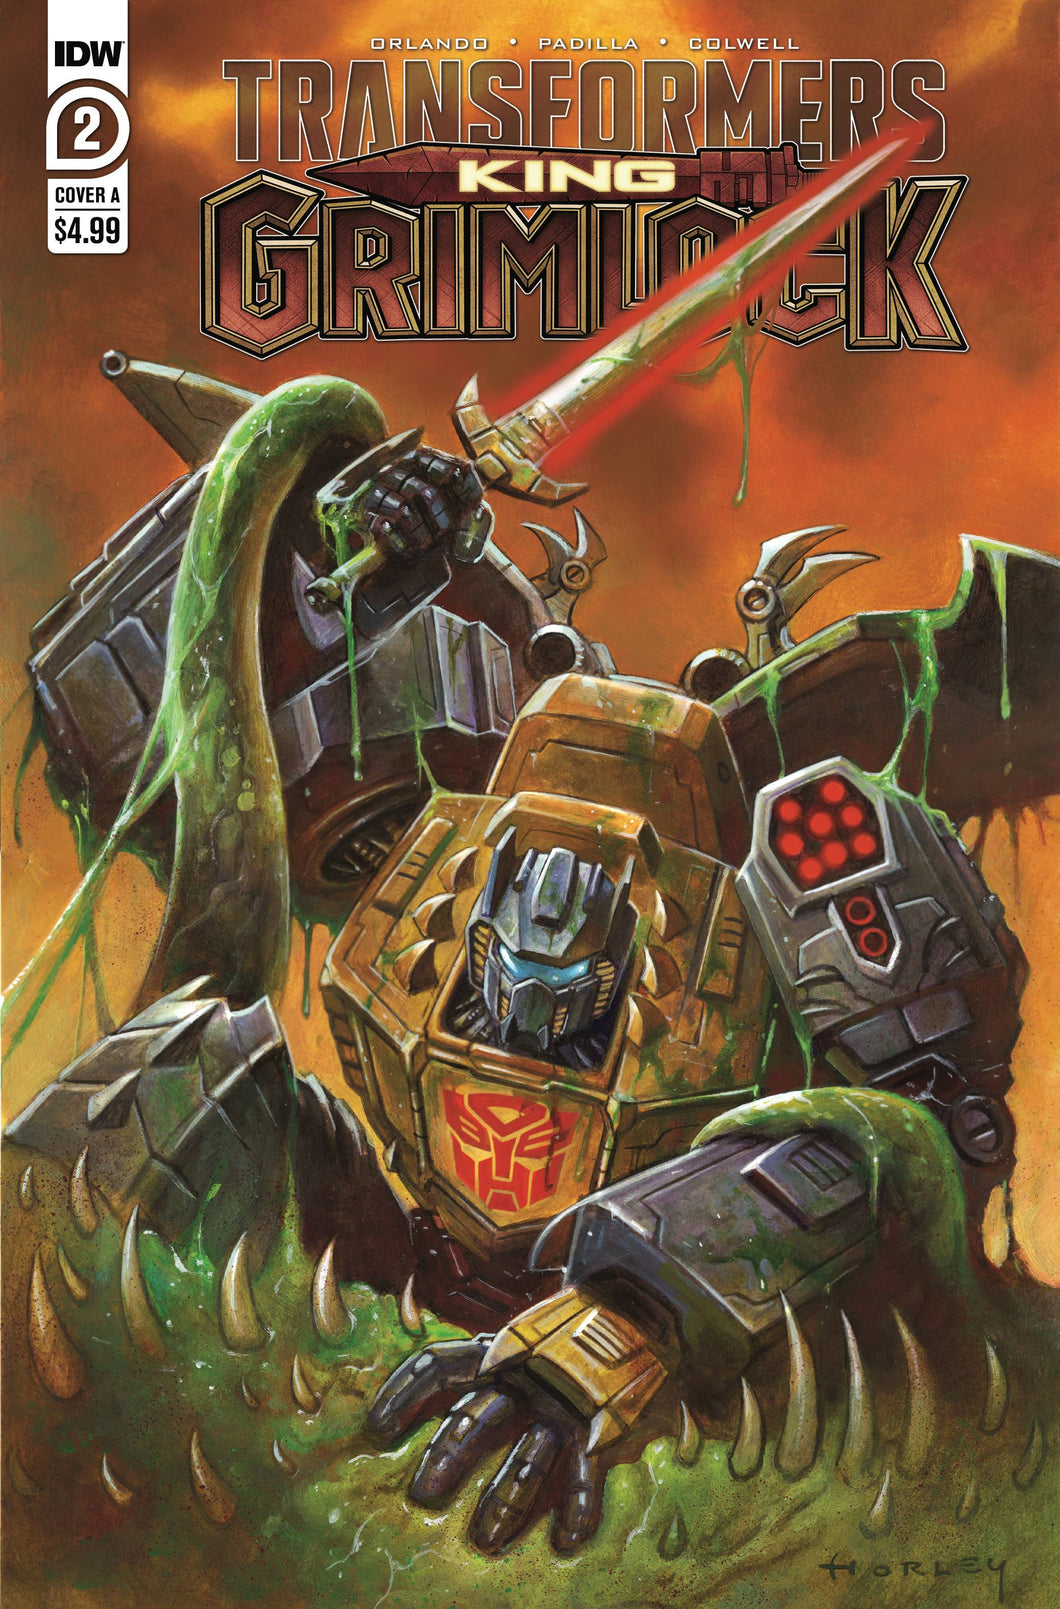 Transformers King Grimlock #2 (Cover A - Horley)